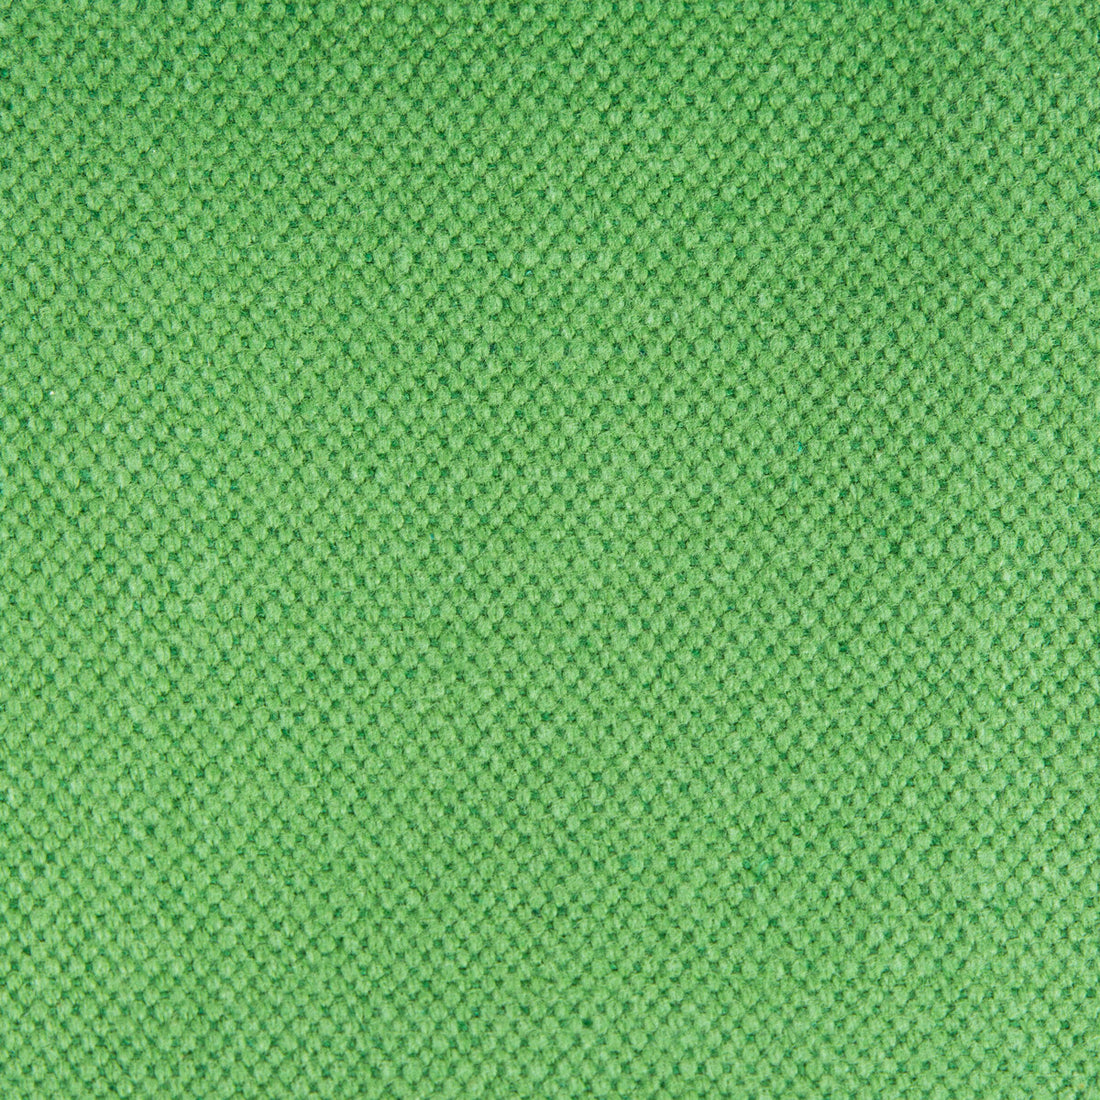 Lima fabric in verde color - pattern GDT5616.011.0 - by Gaston y Daniela in the Gaston Nuevo Mundo collection